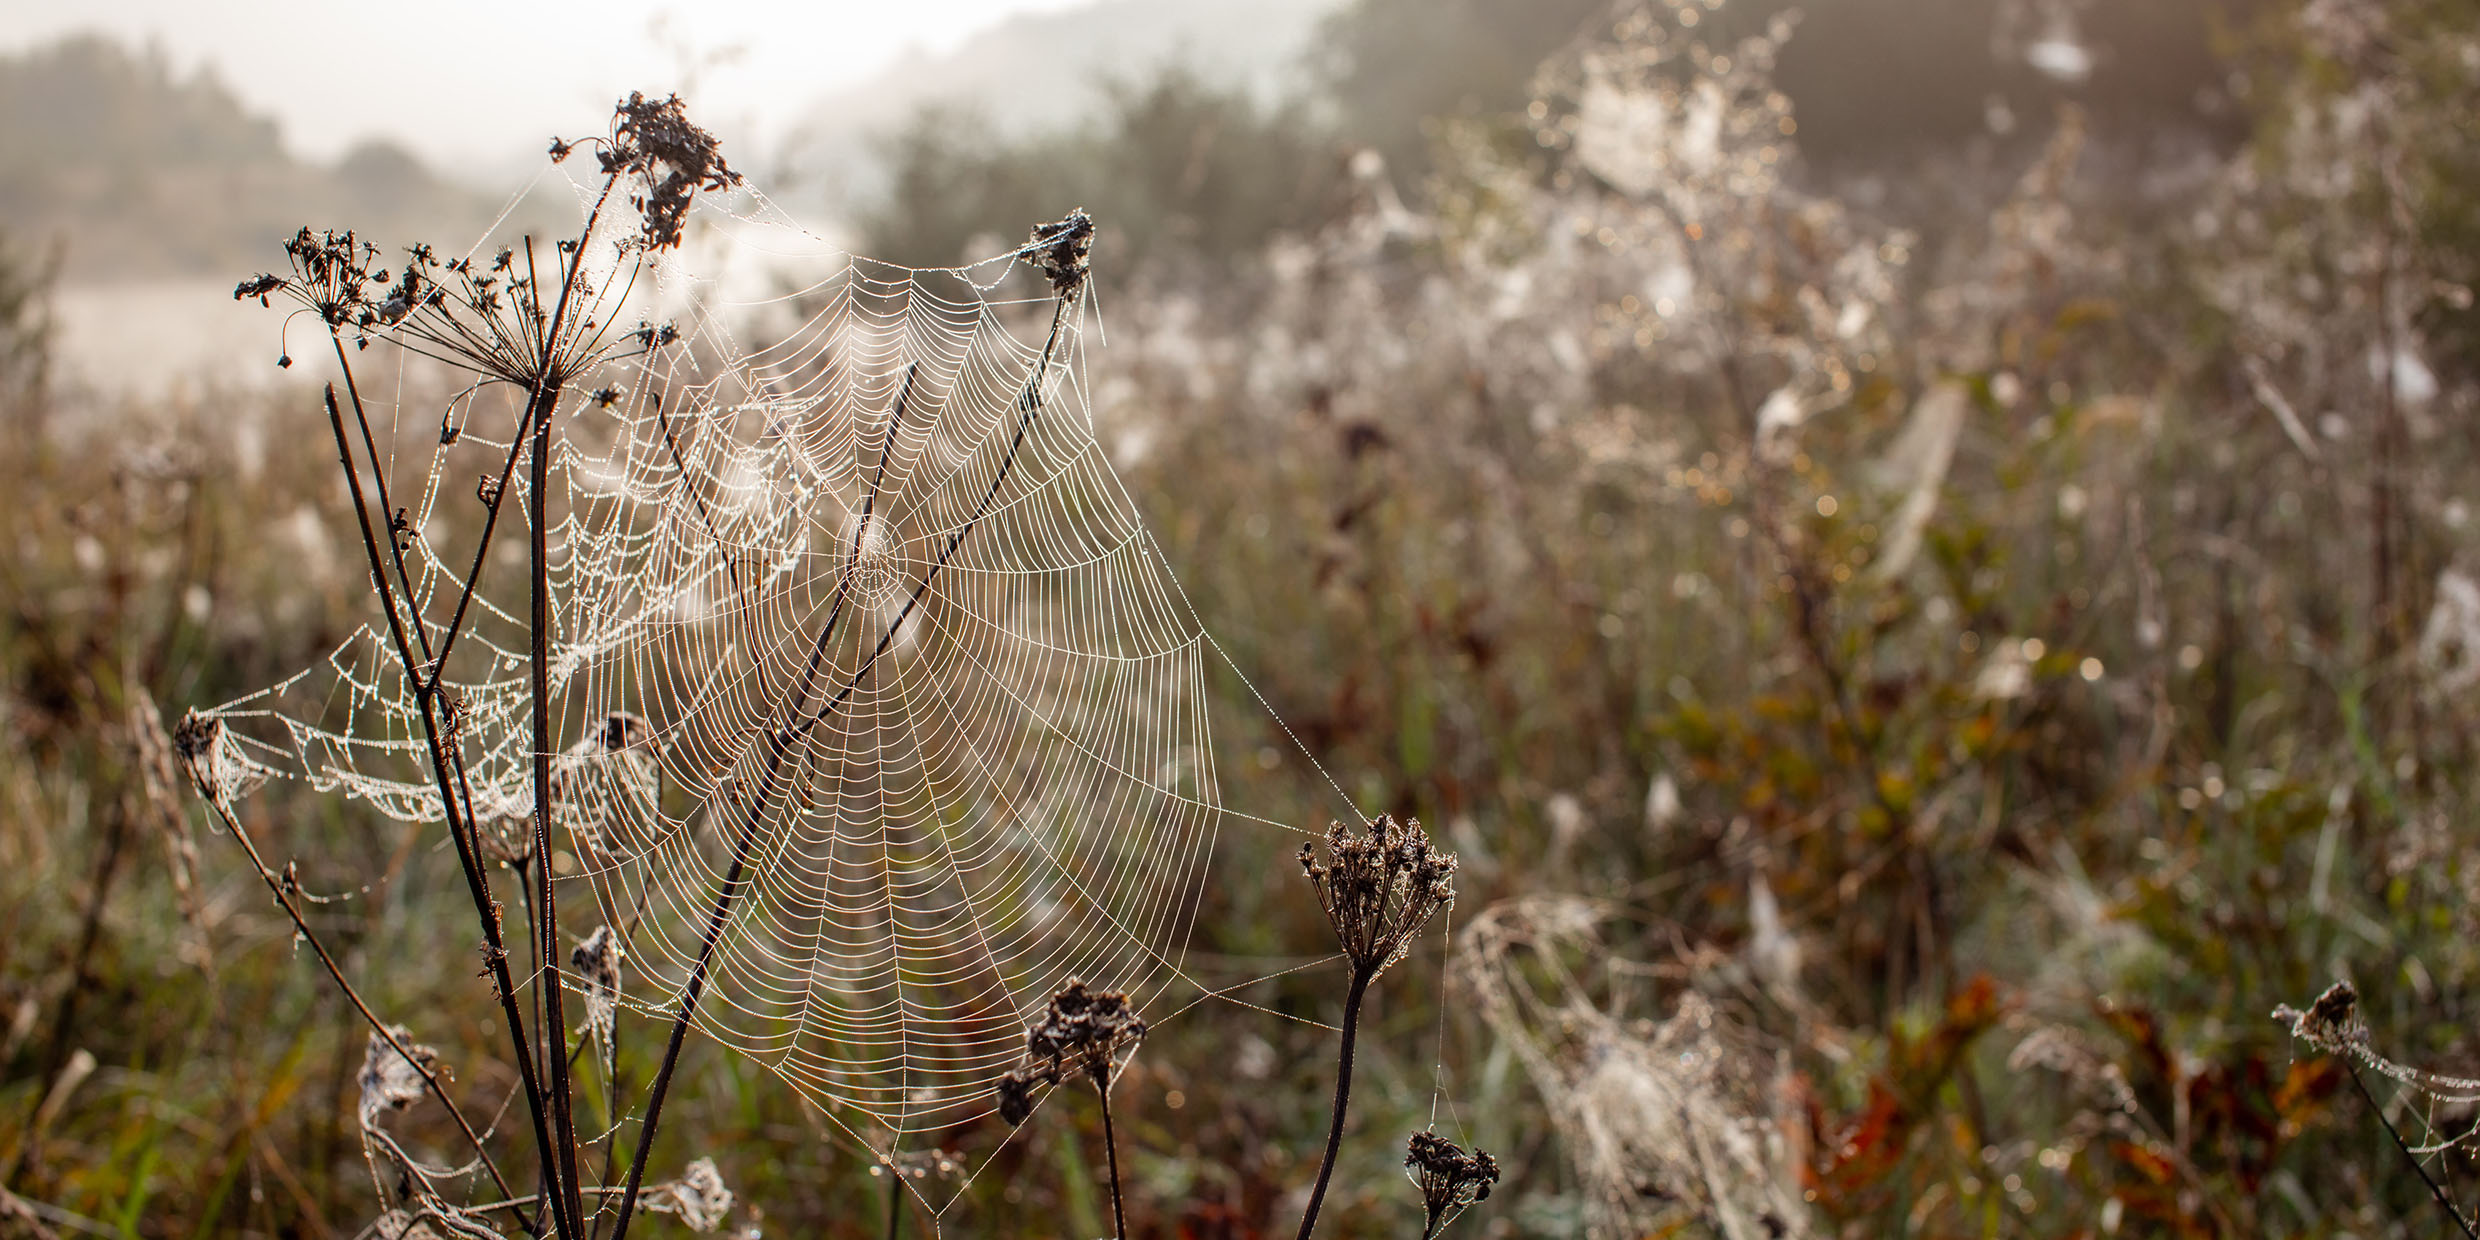 Image of a spider web in a meadow glistening in dawn light